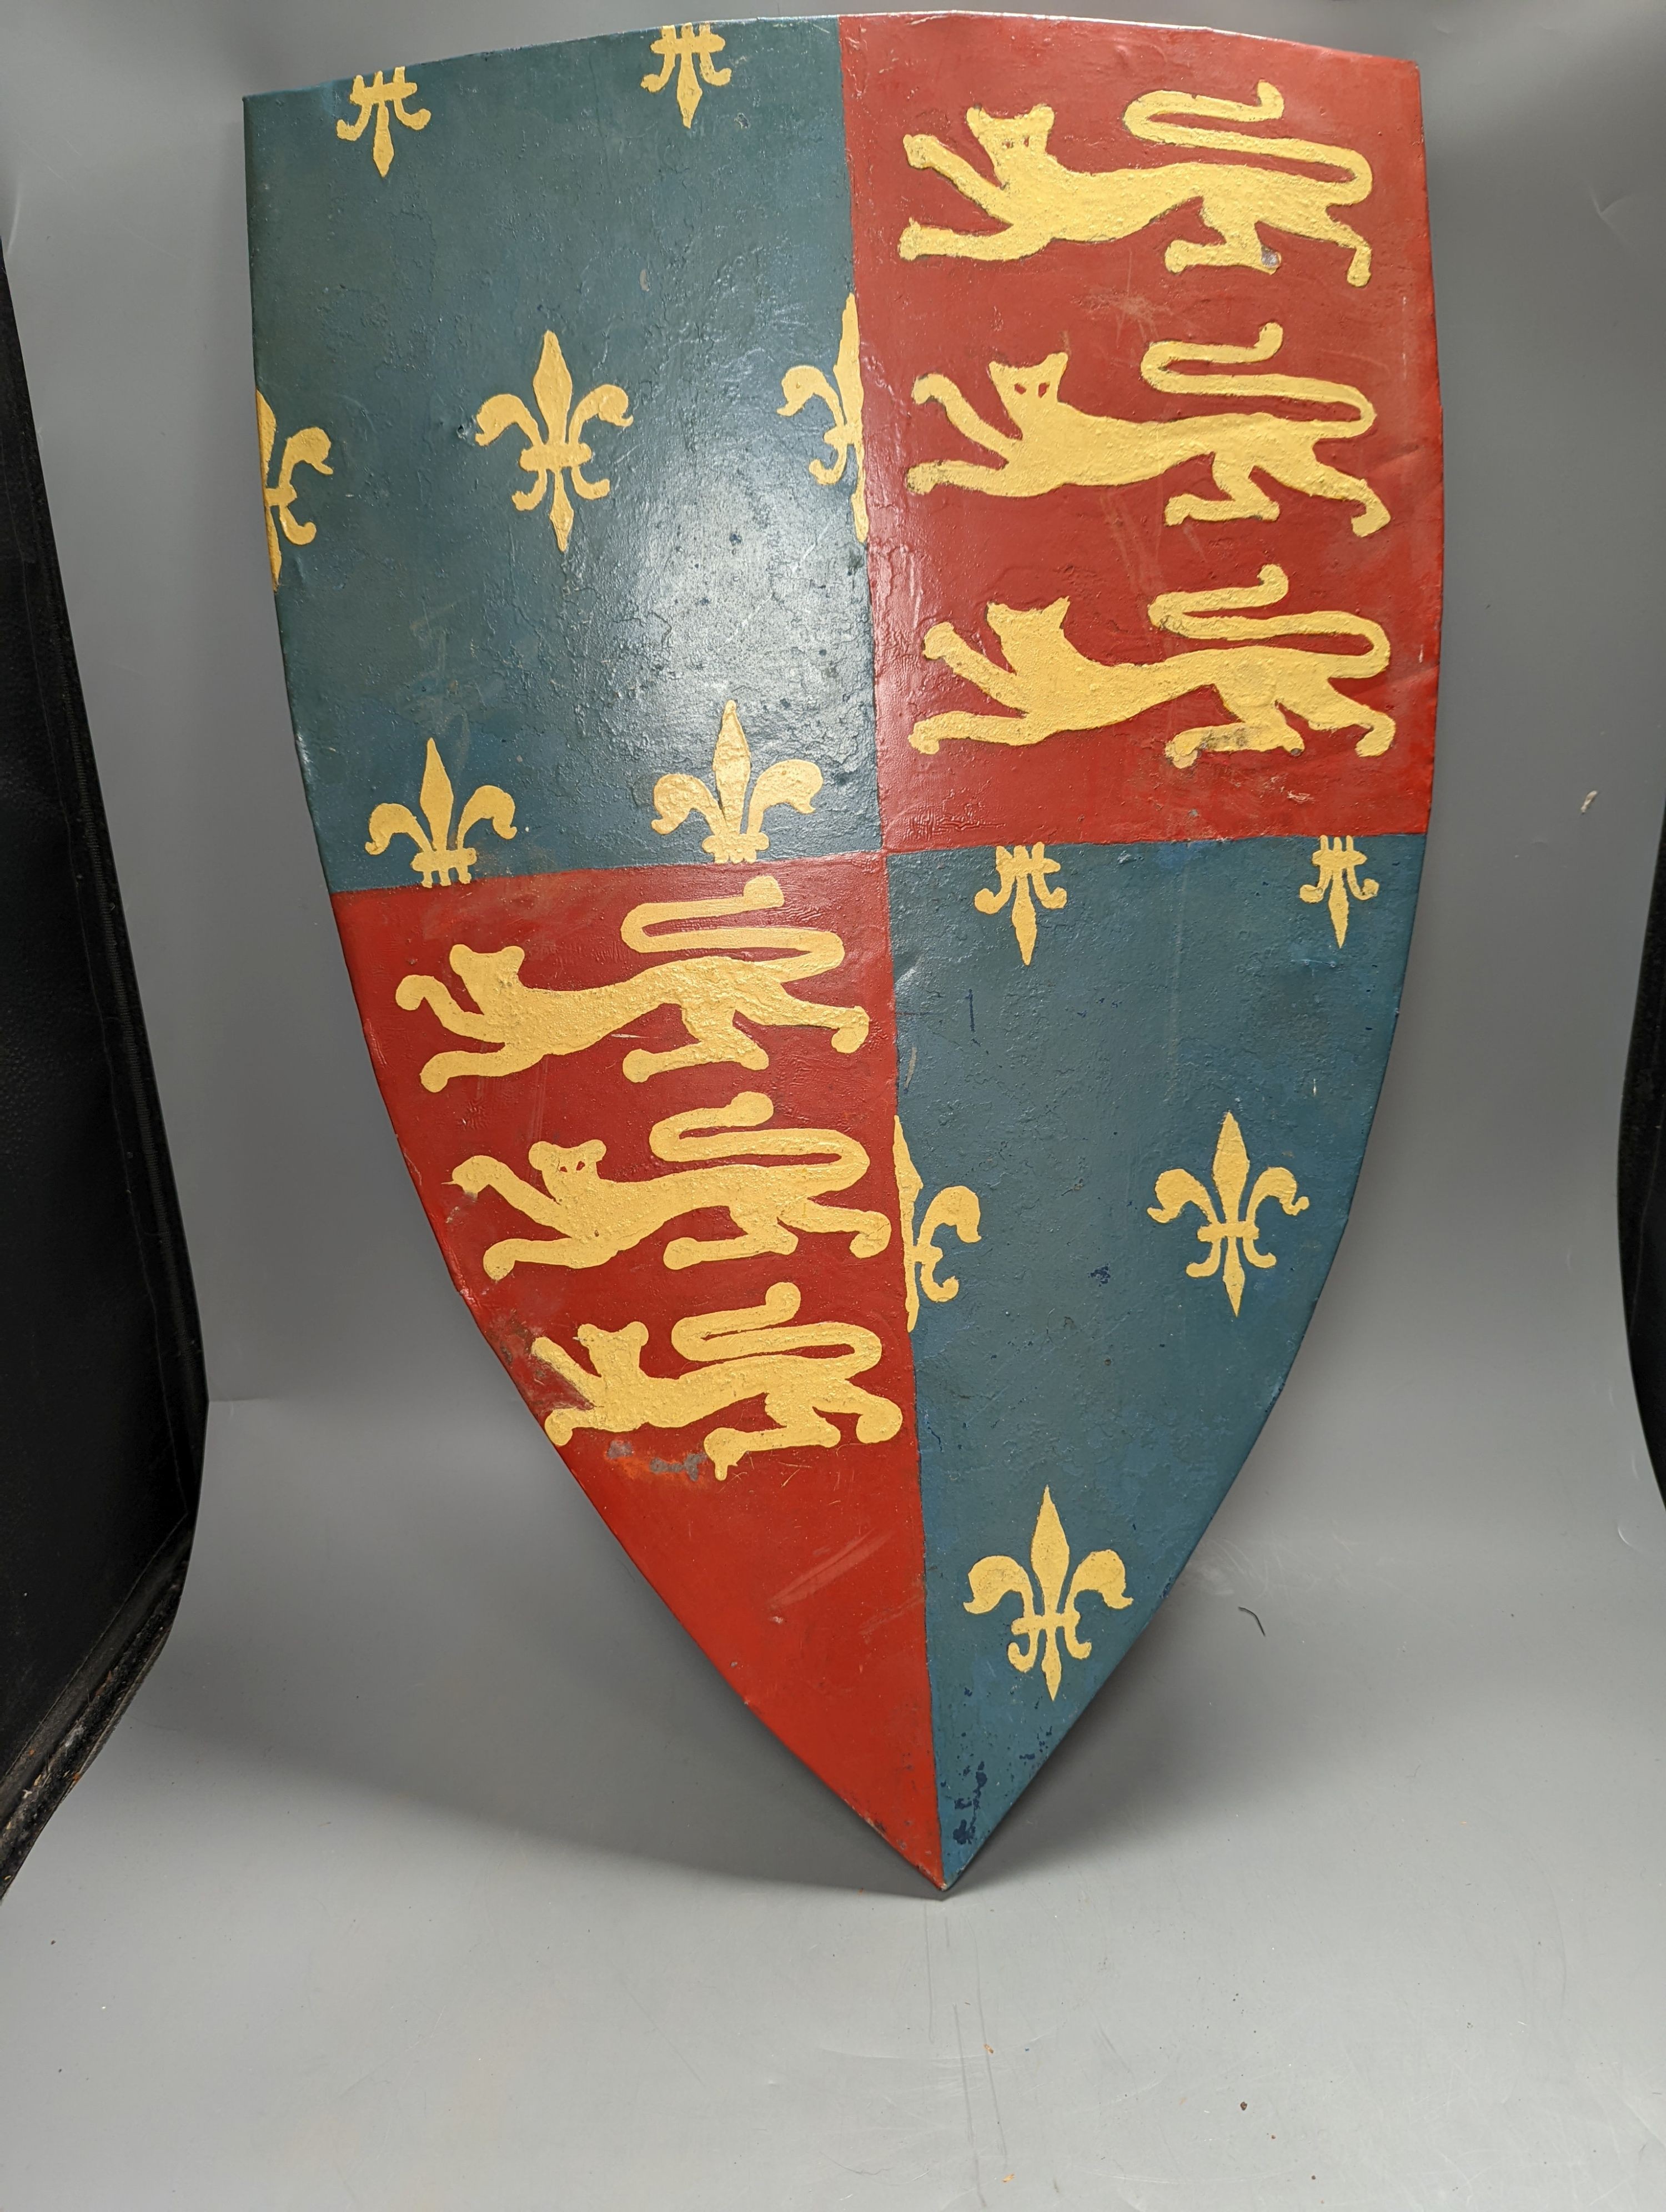 A collection of heraldic shields